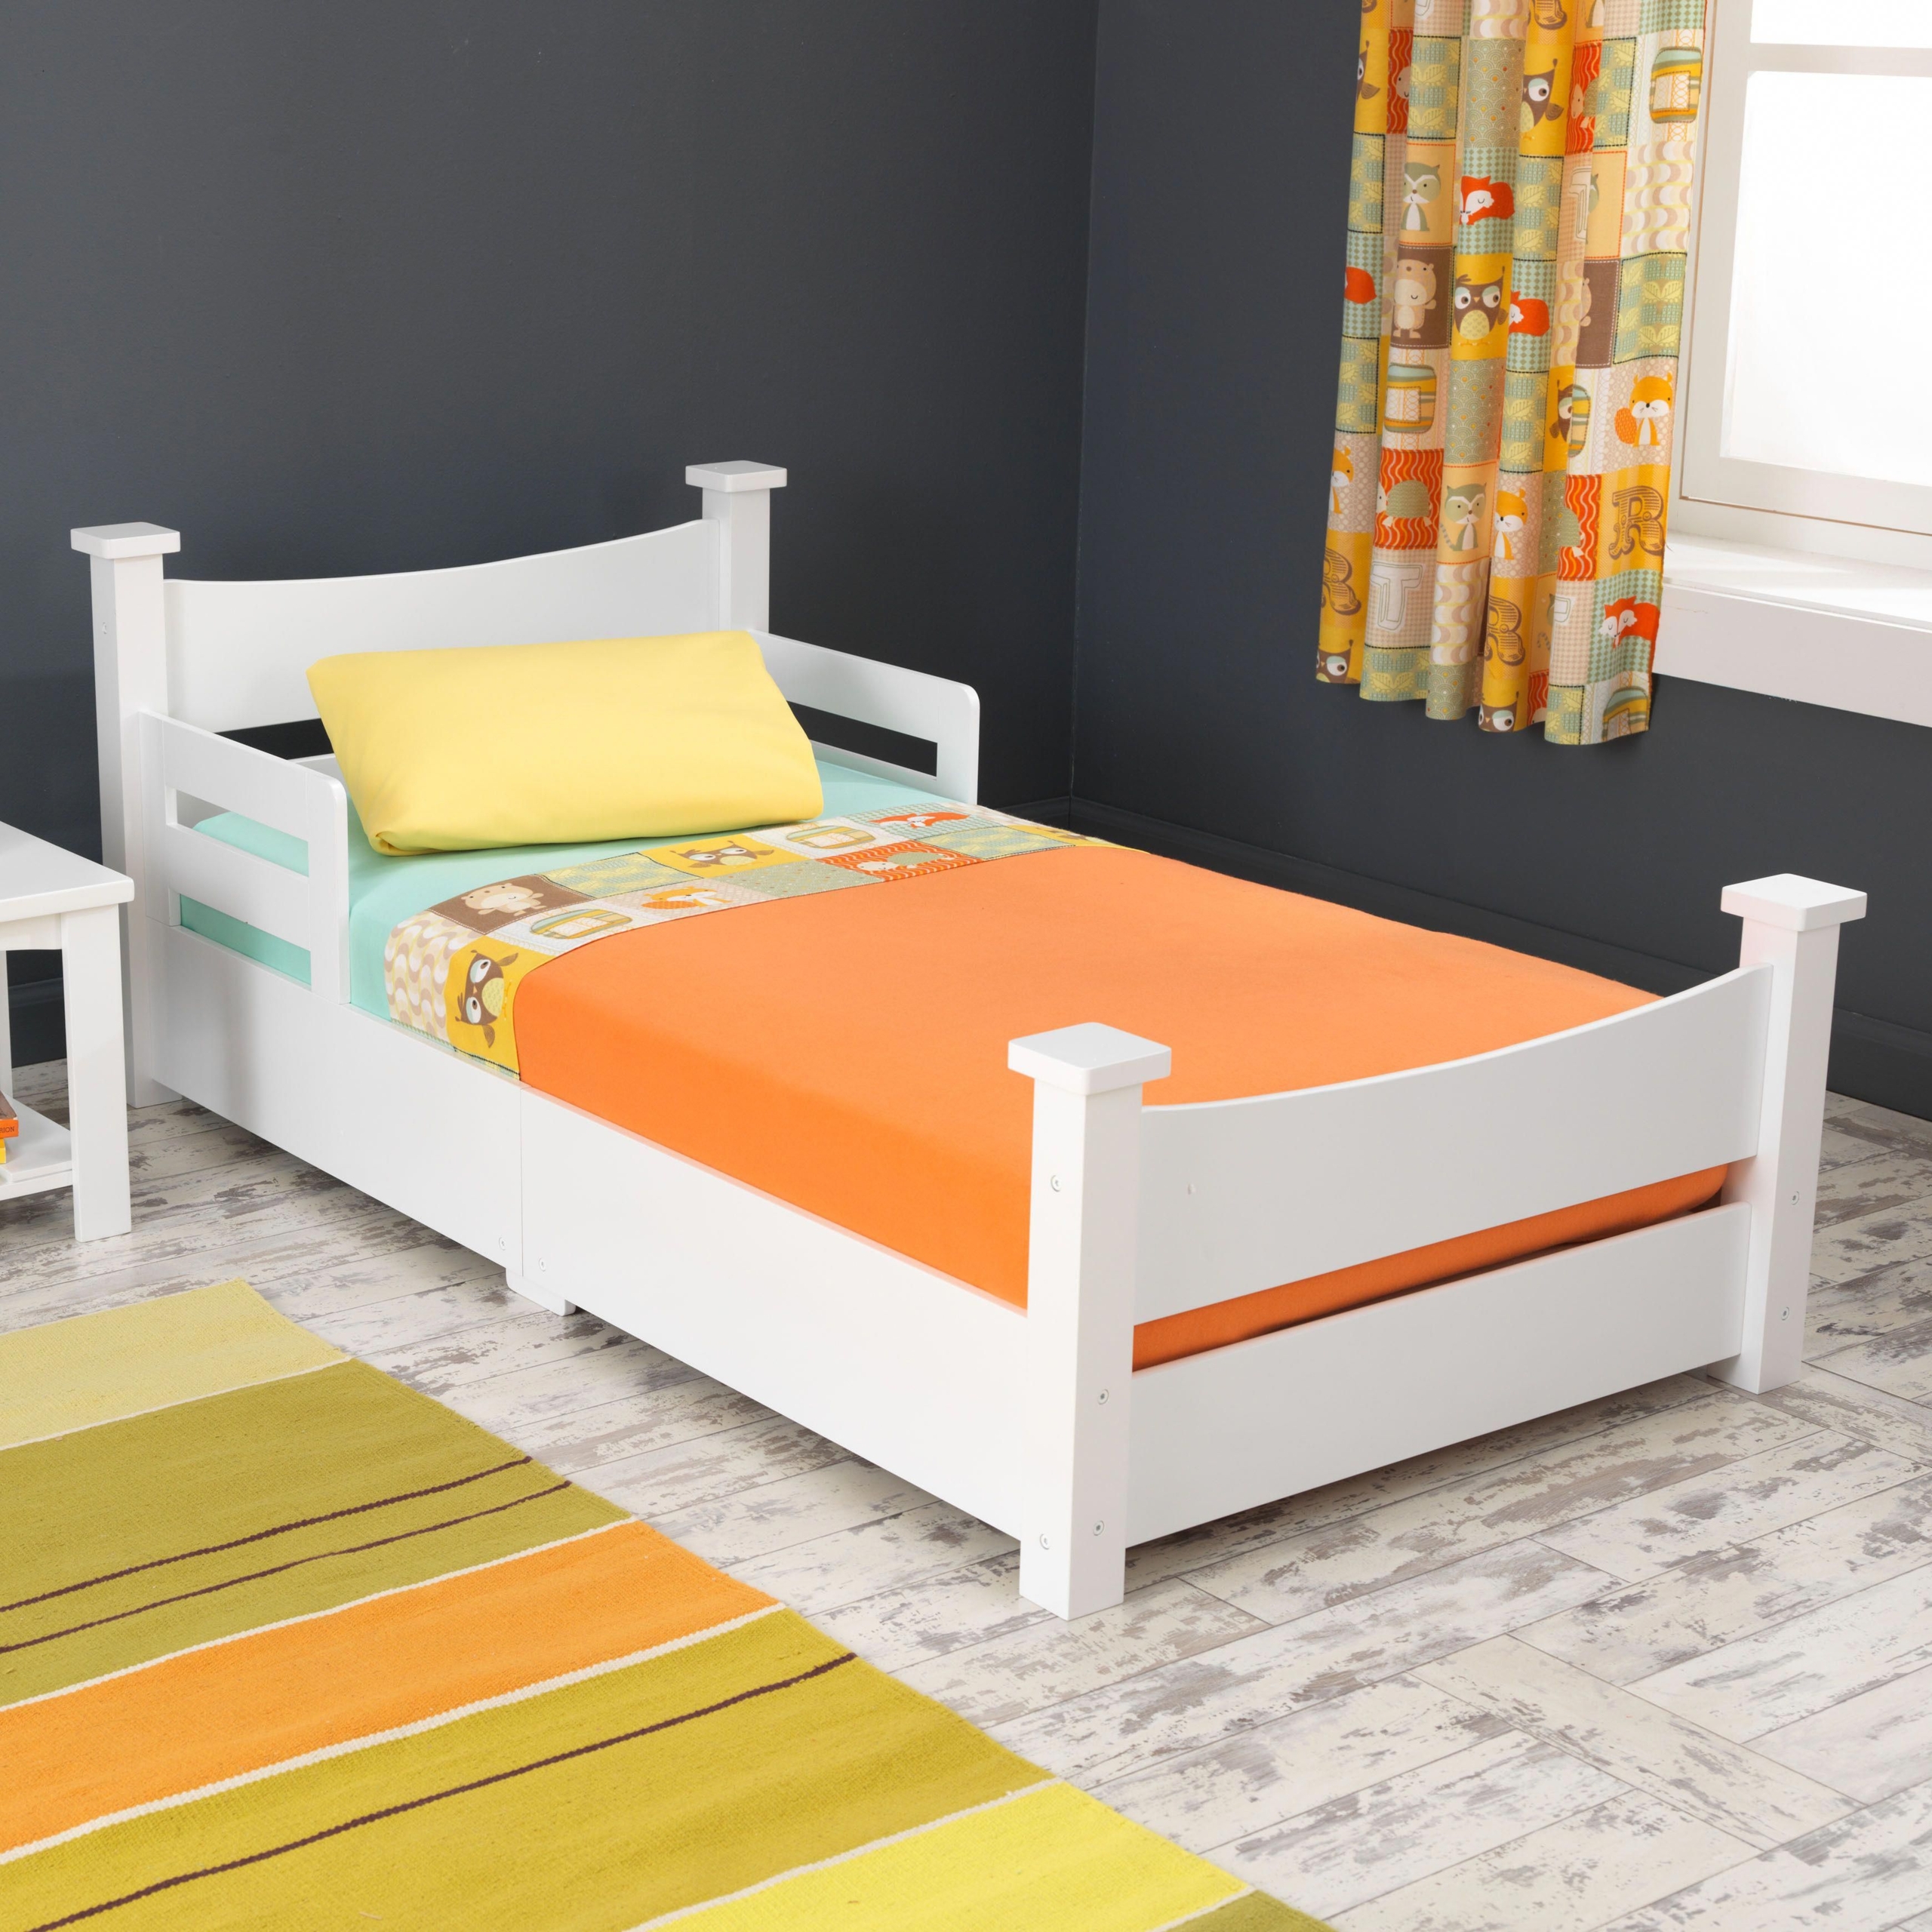 Addison Convertible Toddler Bed